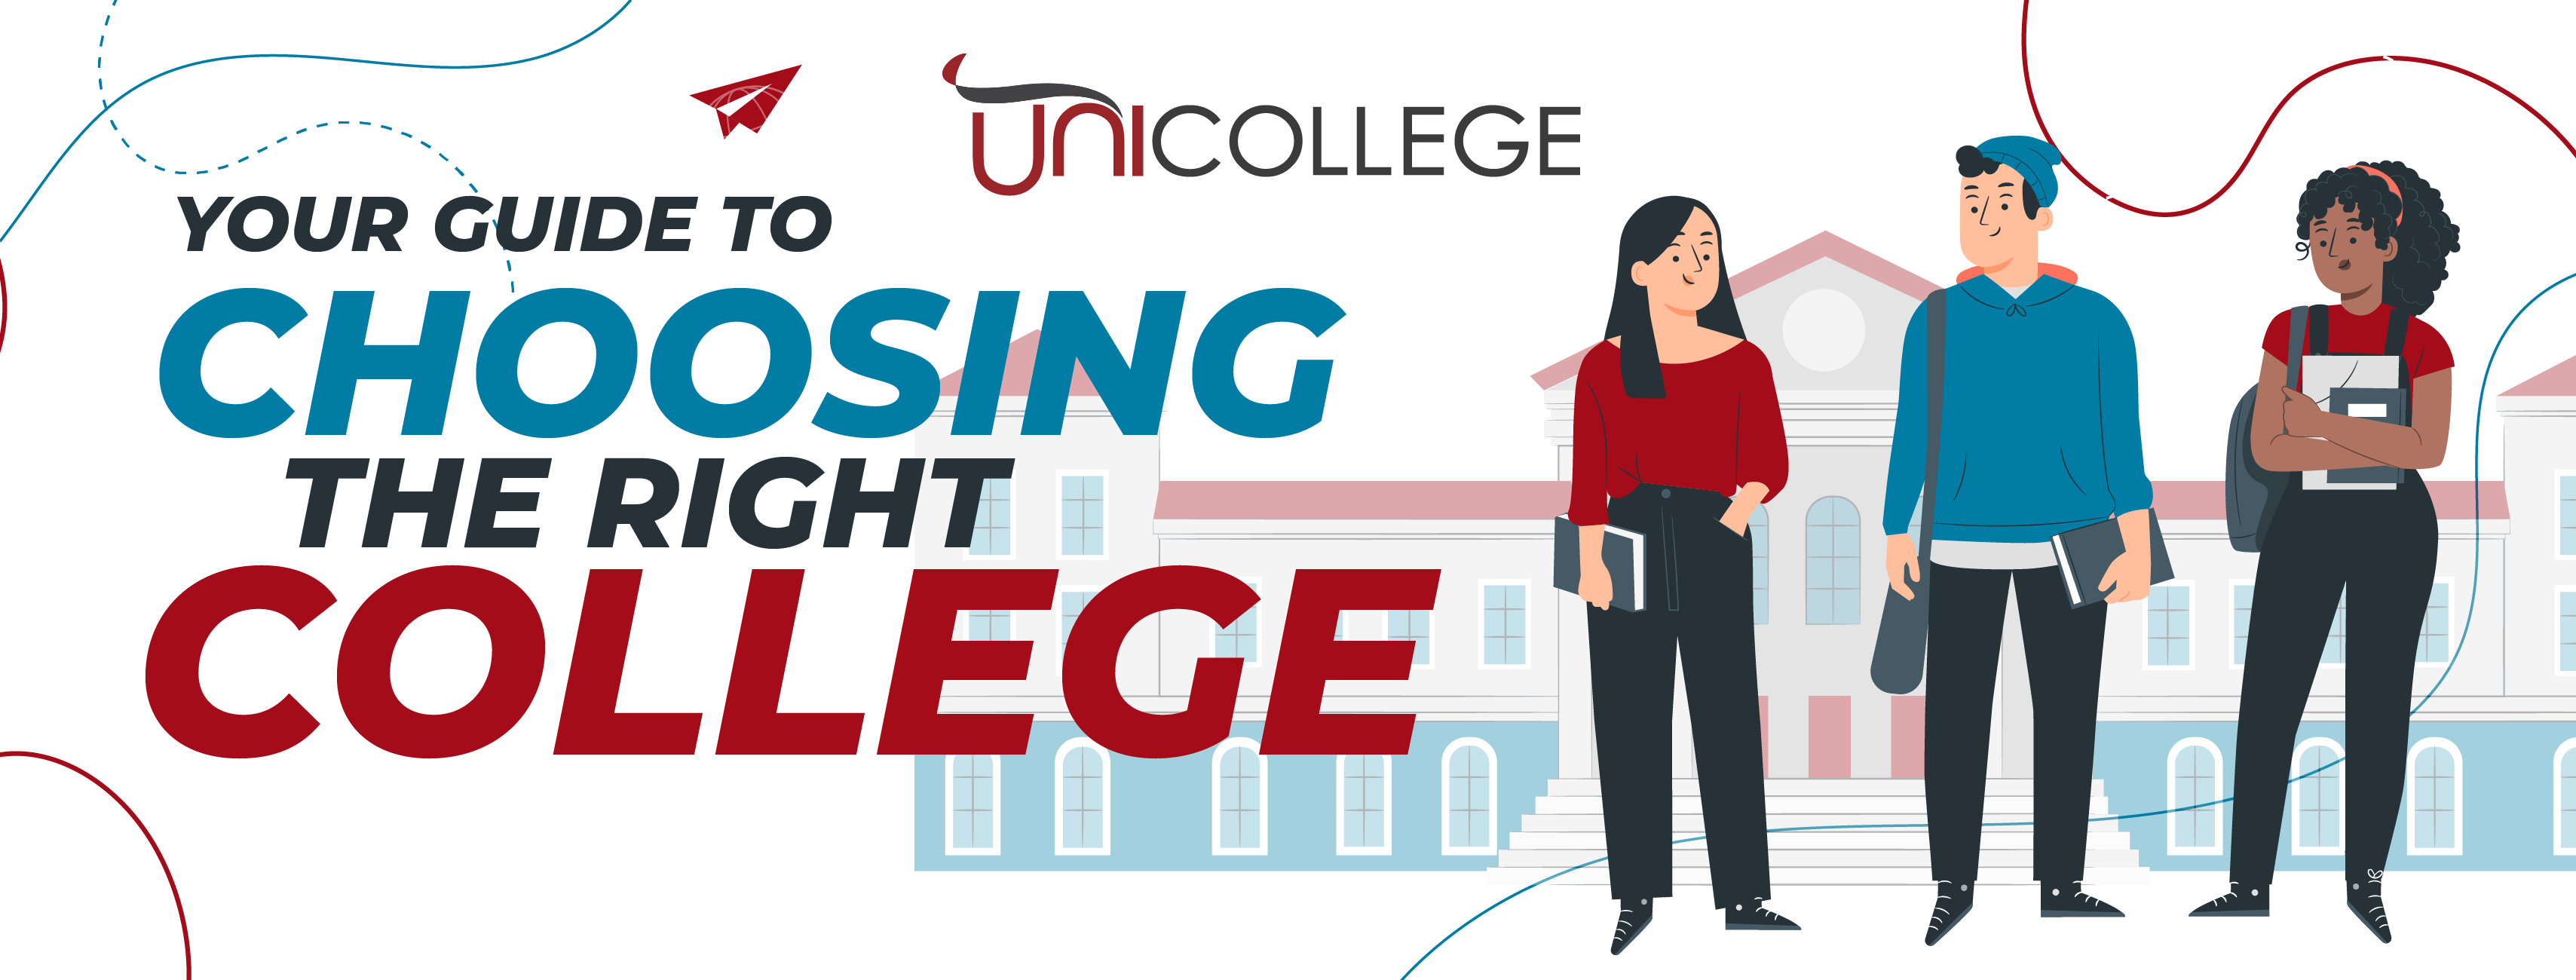 Guide to Choosing the Right College